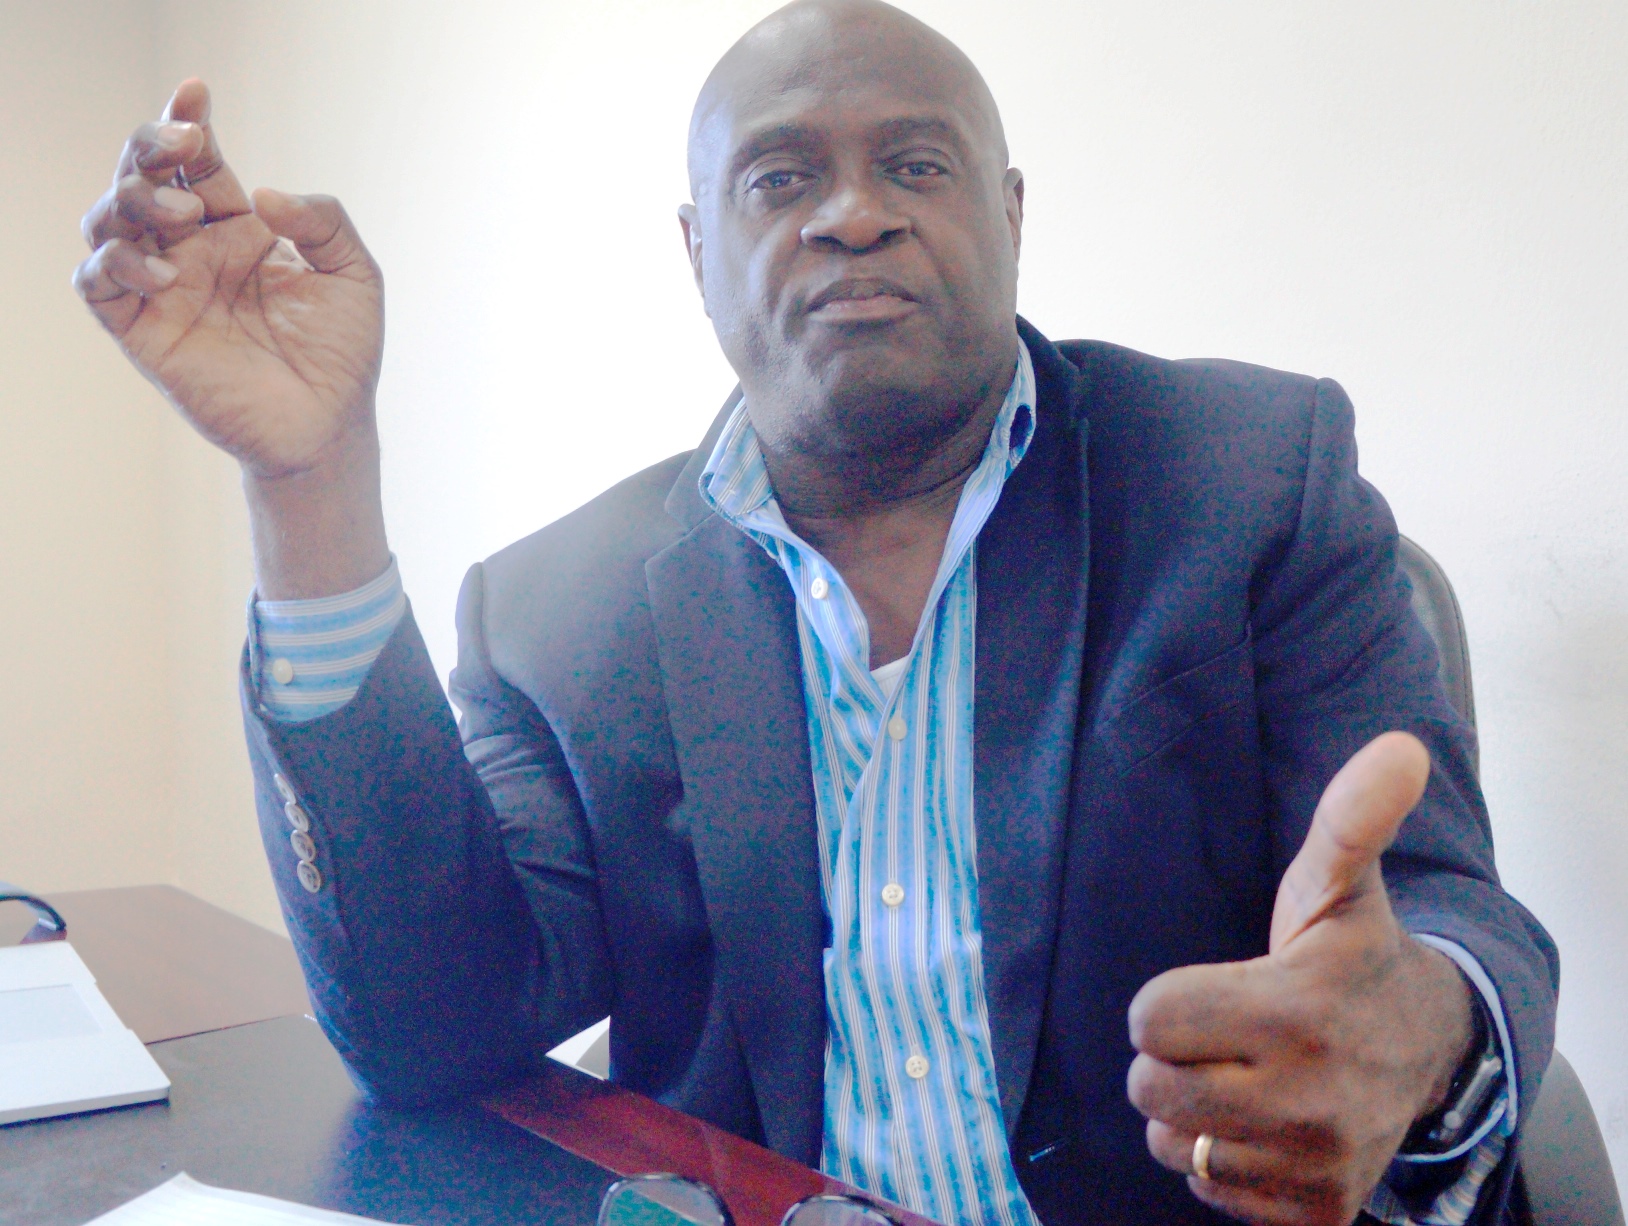 Technology will grow faster with the right politics, says Onyekwere,